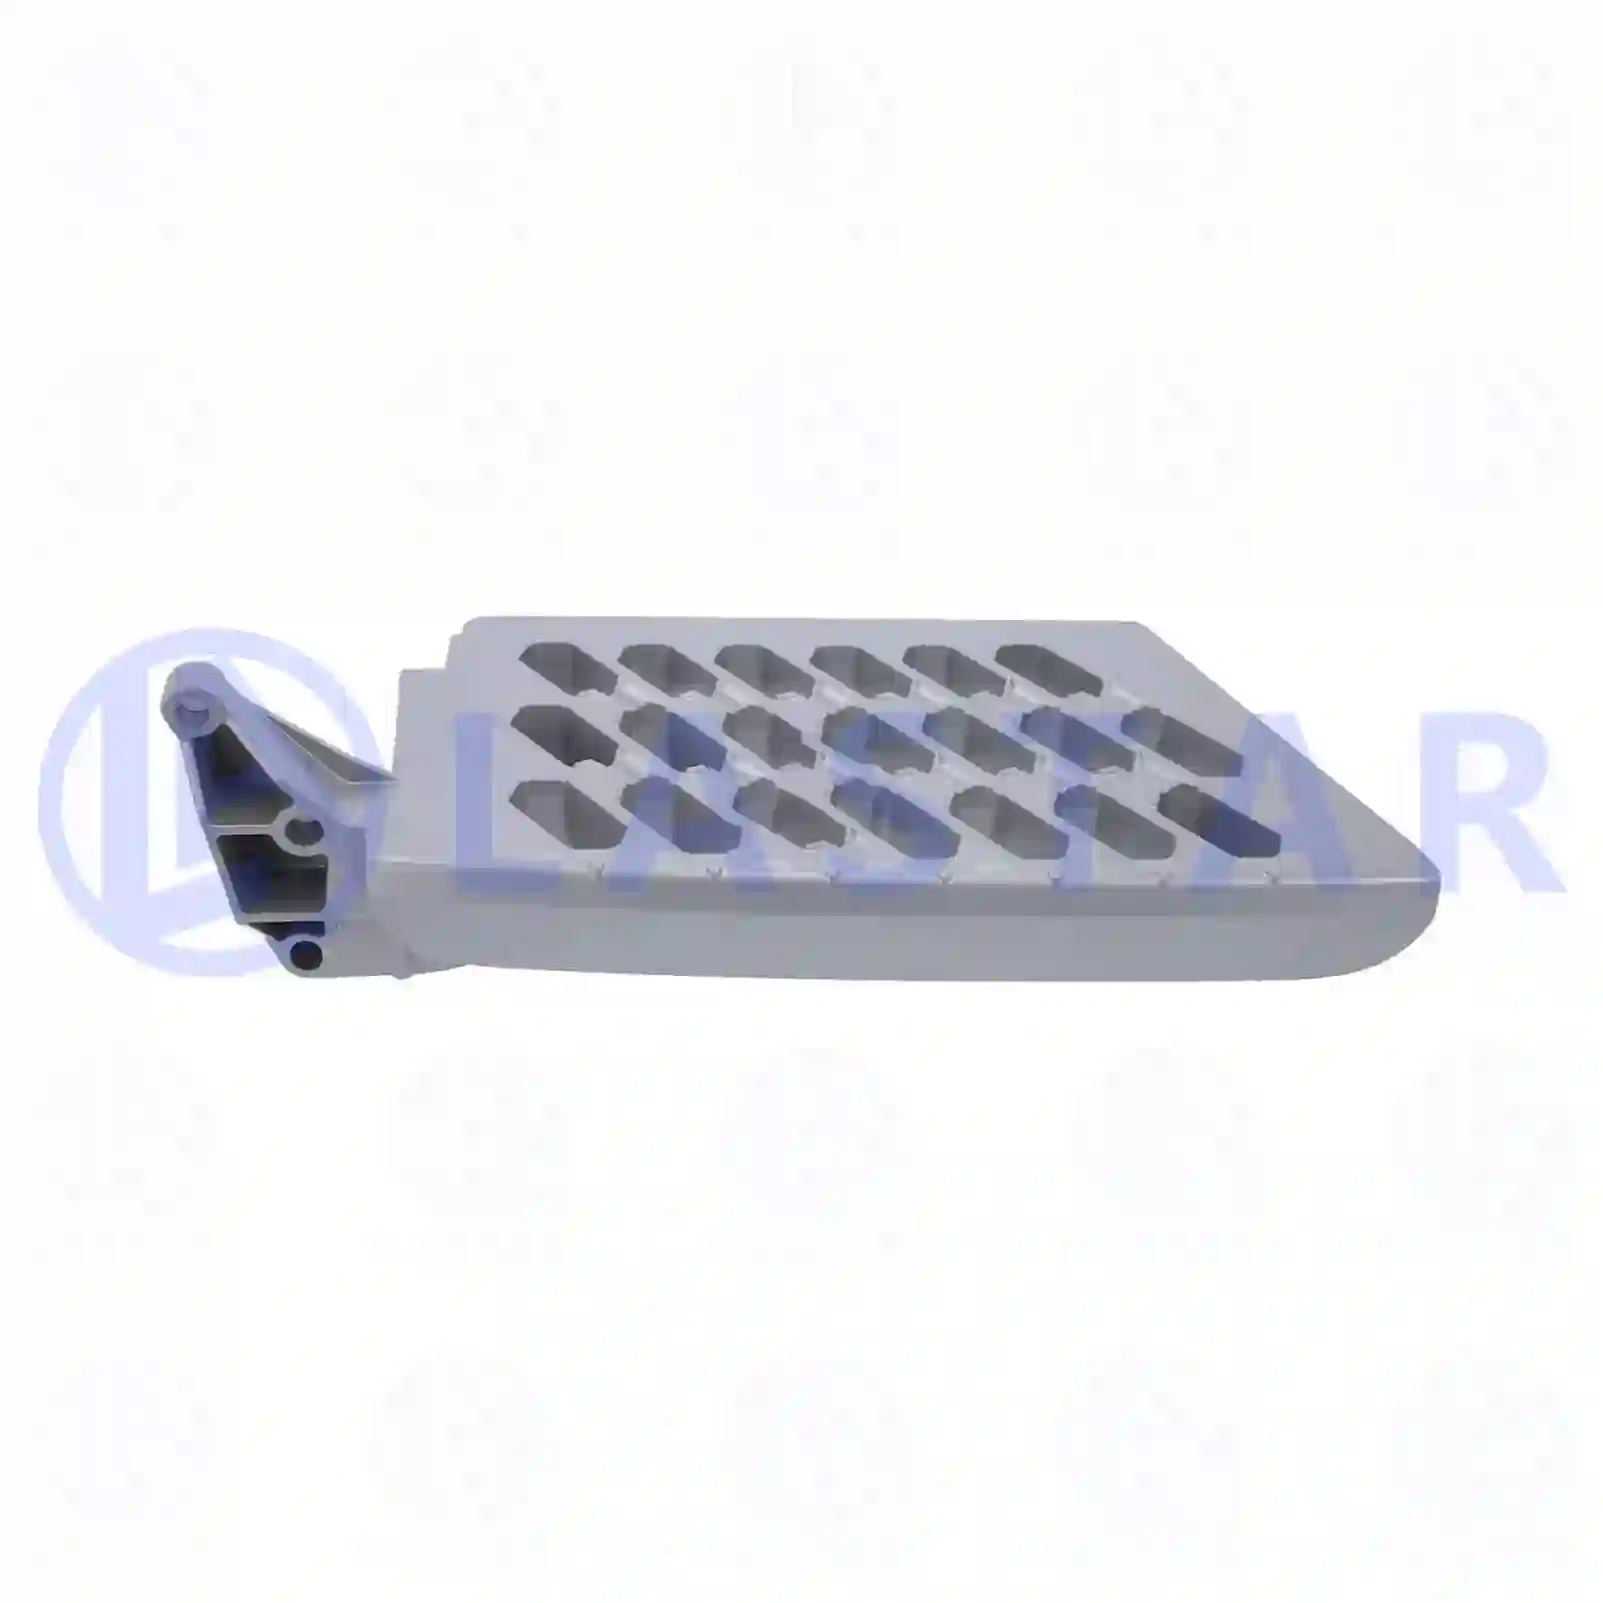 Step plate, 77721143, 82171603 ||  77721143 Lastar Spare Part | Truck Spare Parts, Auotomotive Spare Parts Step plate, 77721143, 82171603 ||  77721143 Lastar Spare Part | Truck Spare Parts, Auotomotive Spare Parts